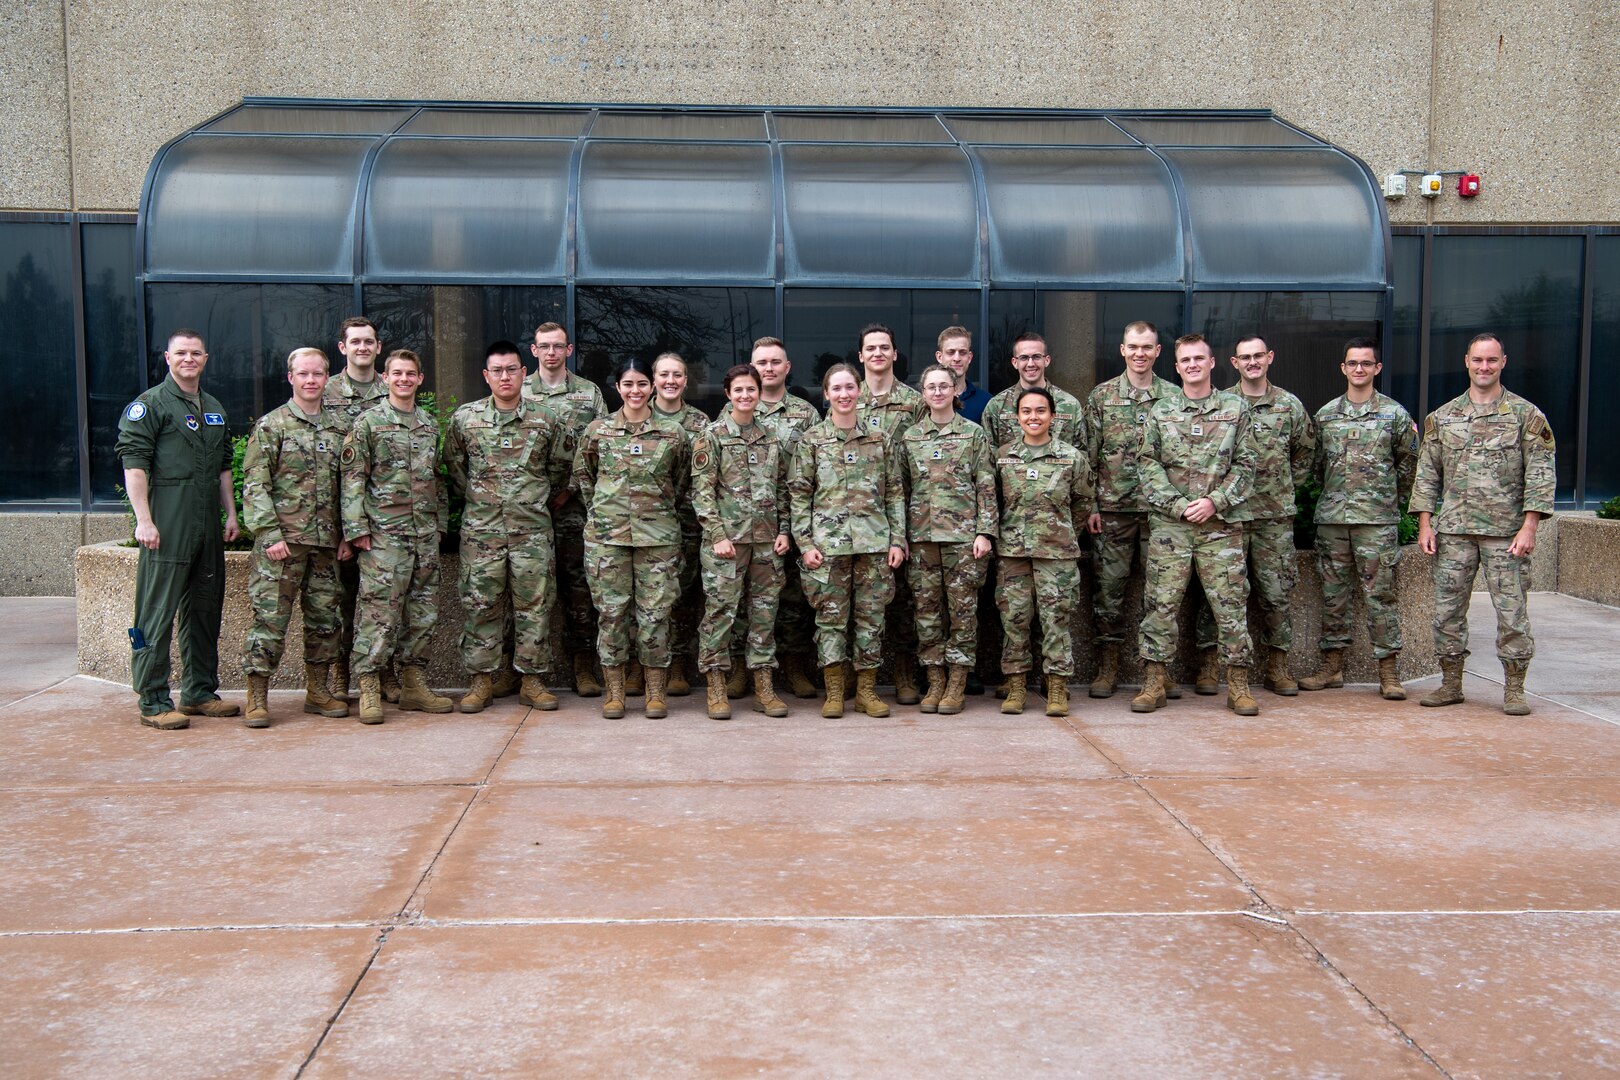 Military members in uniform pose for a group photo